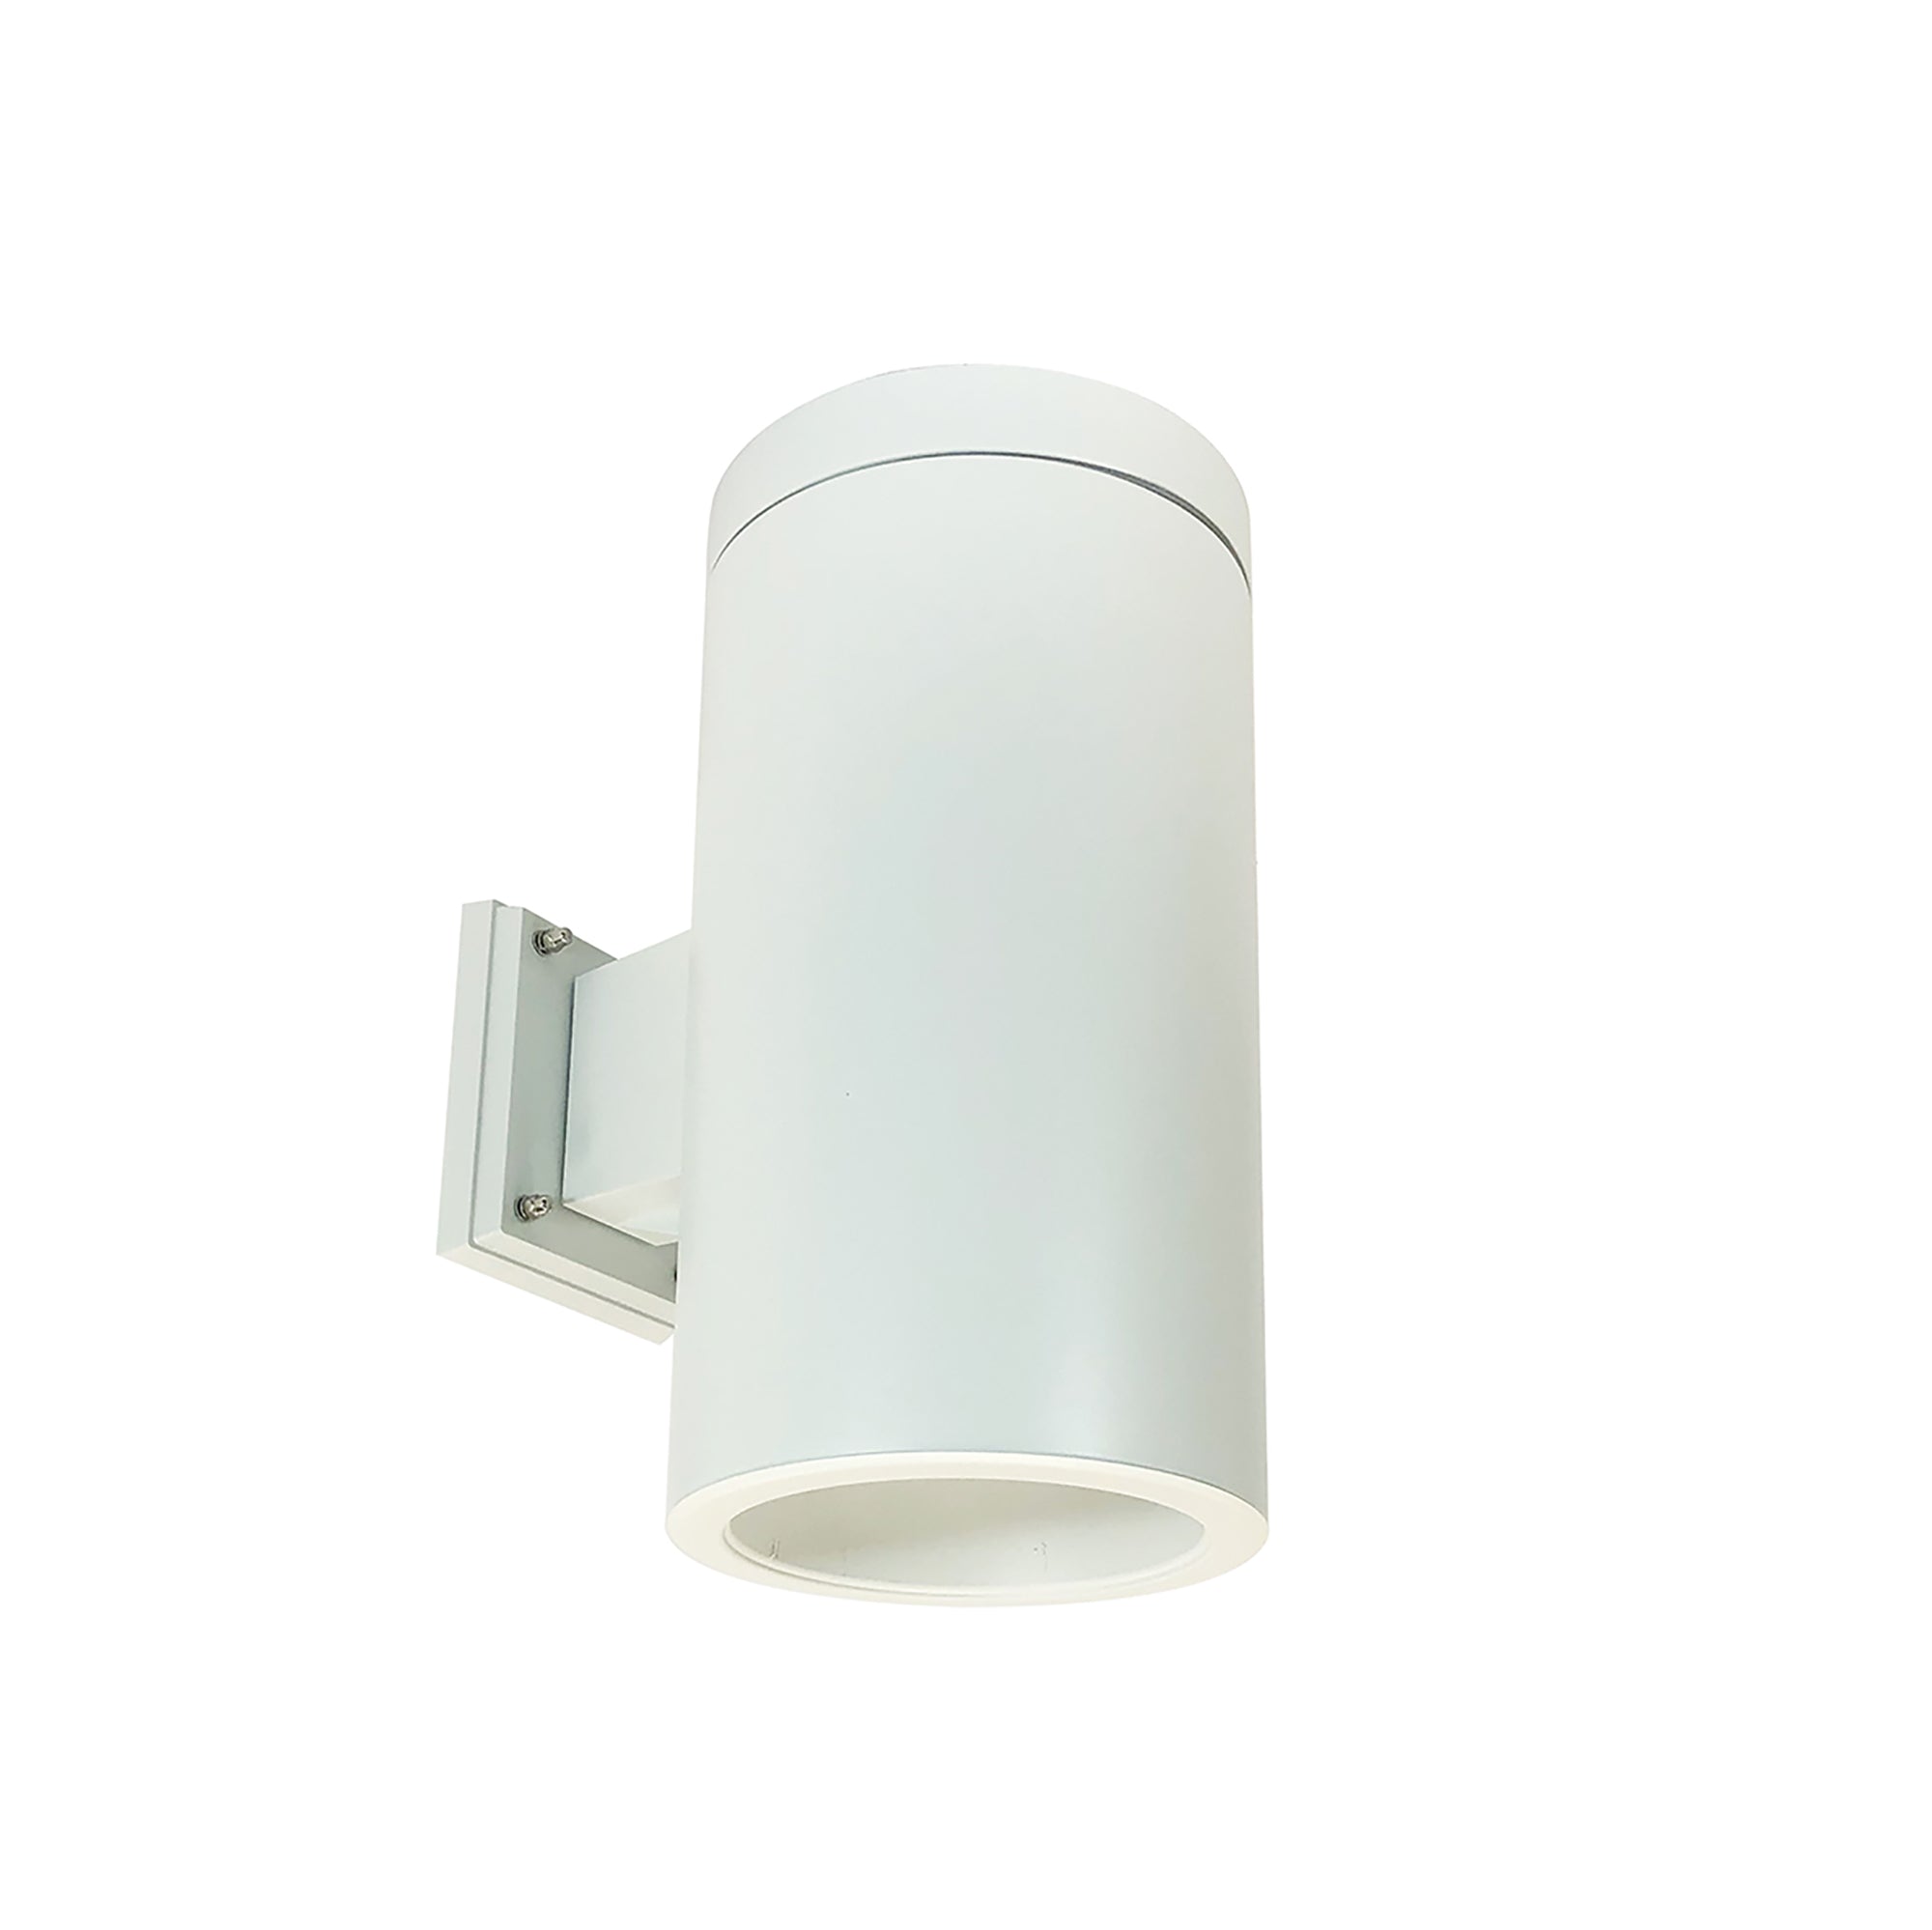 Nora Lighting NYLS2-6W25135SWWW6 - Cylinder - 6 Inch CYL WALL 2500LM REF 35K WH/WH WH CYL 120/277V 0-10V